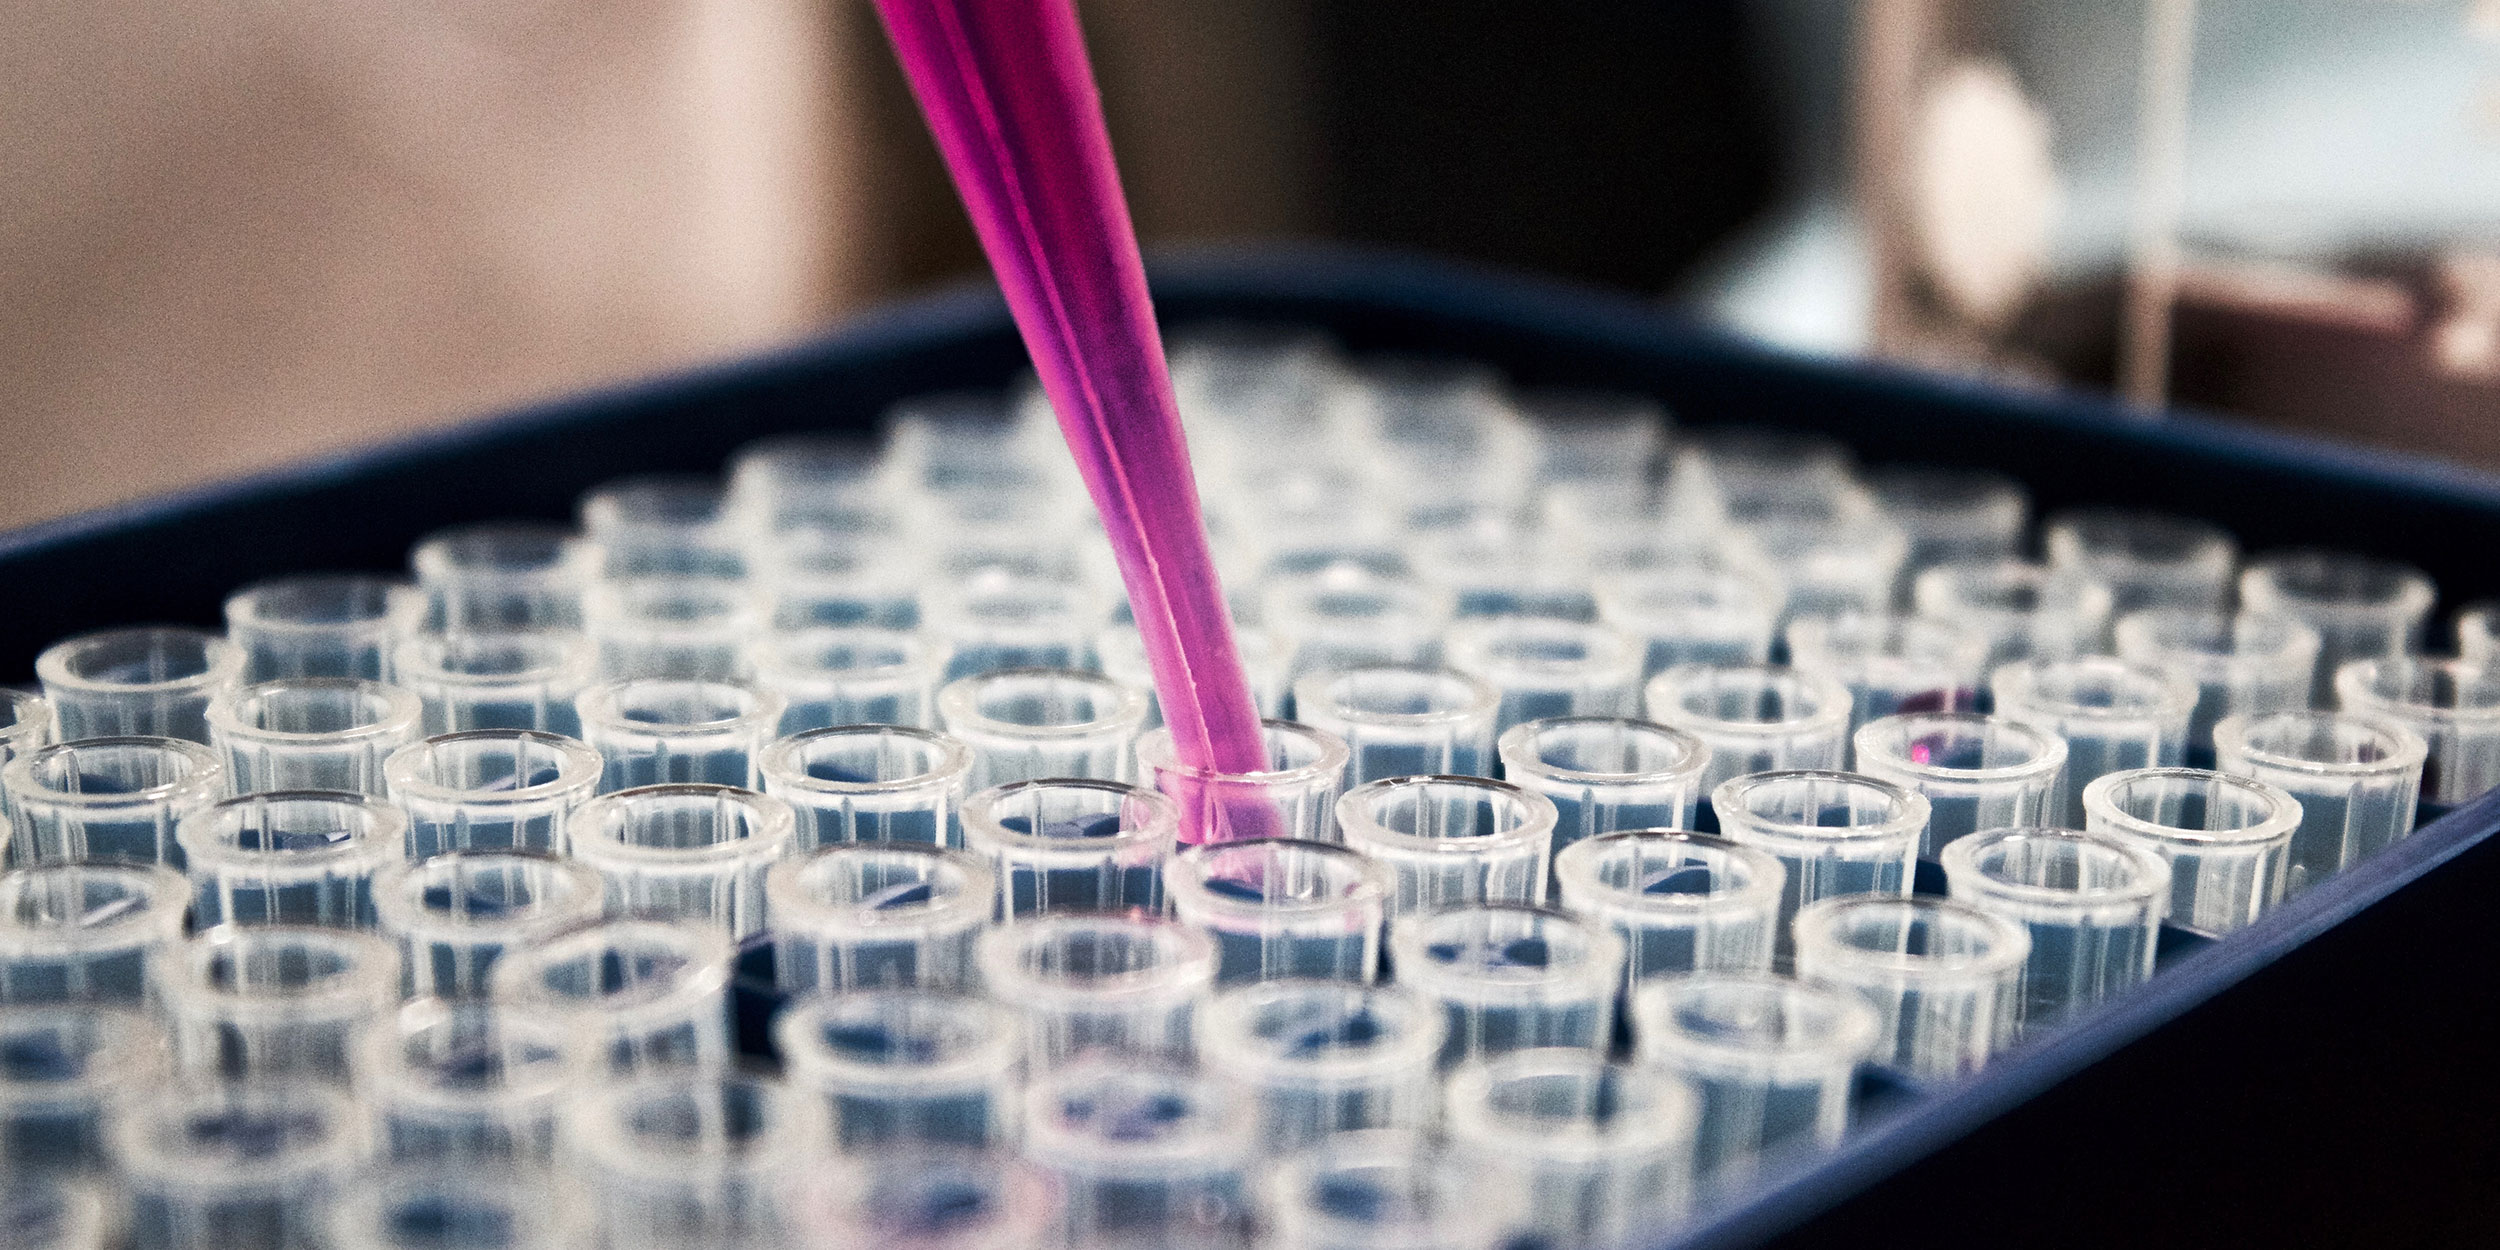 A scientists conducts research with a pipette full of purple liquid in small glass vials